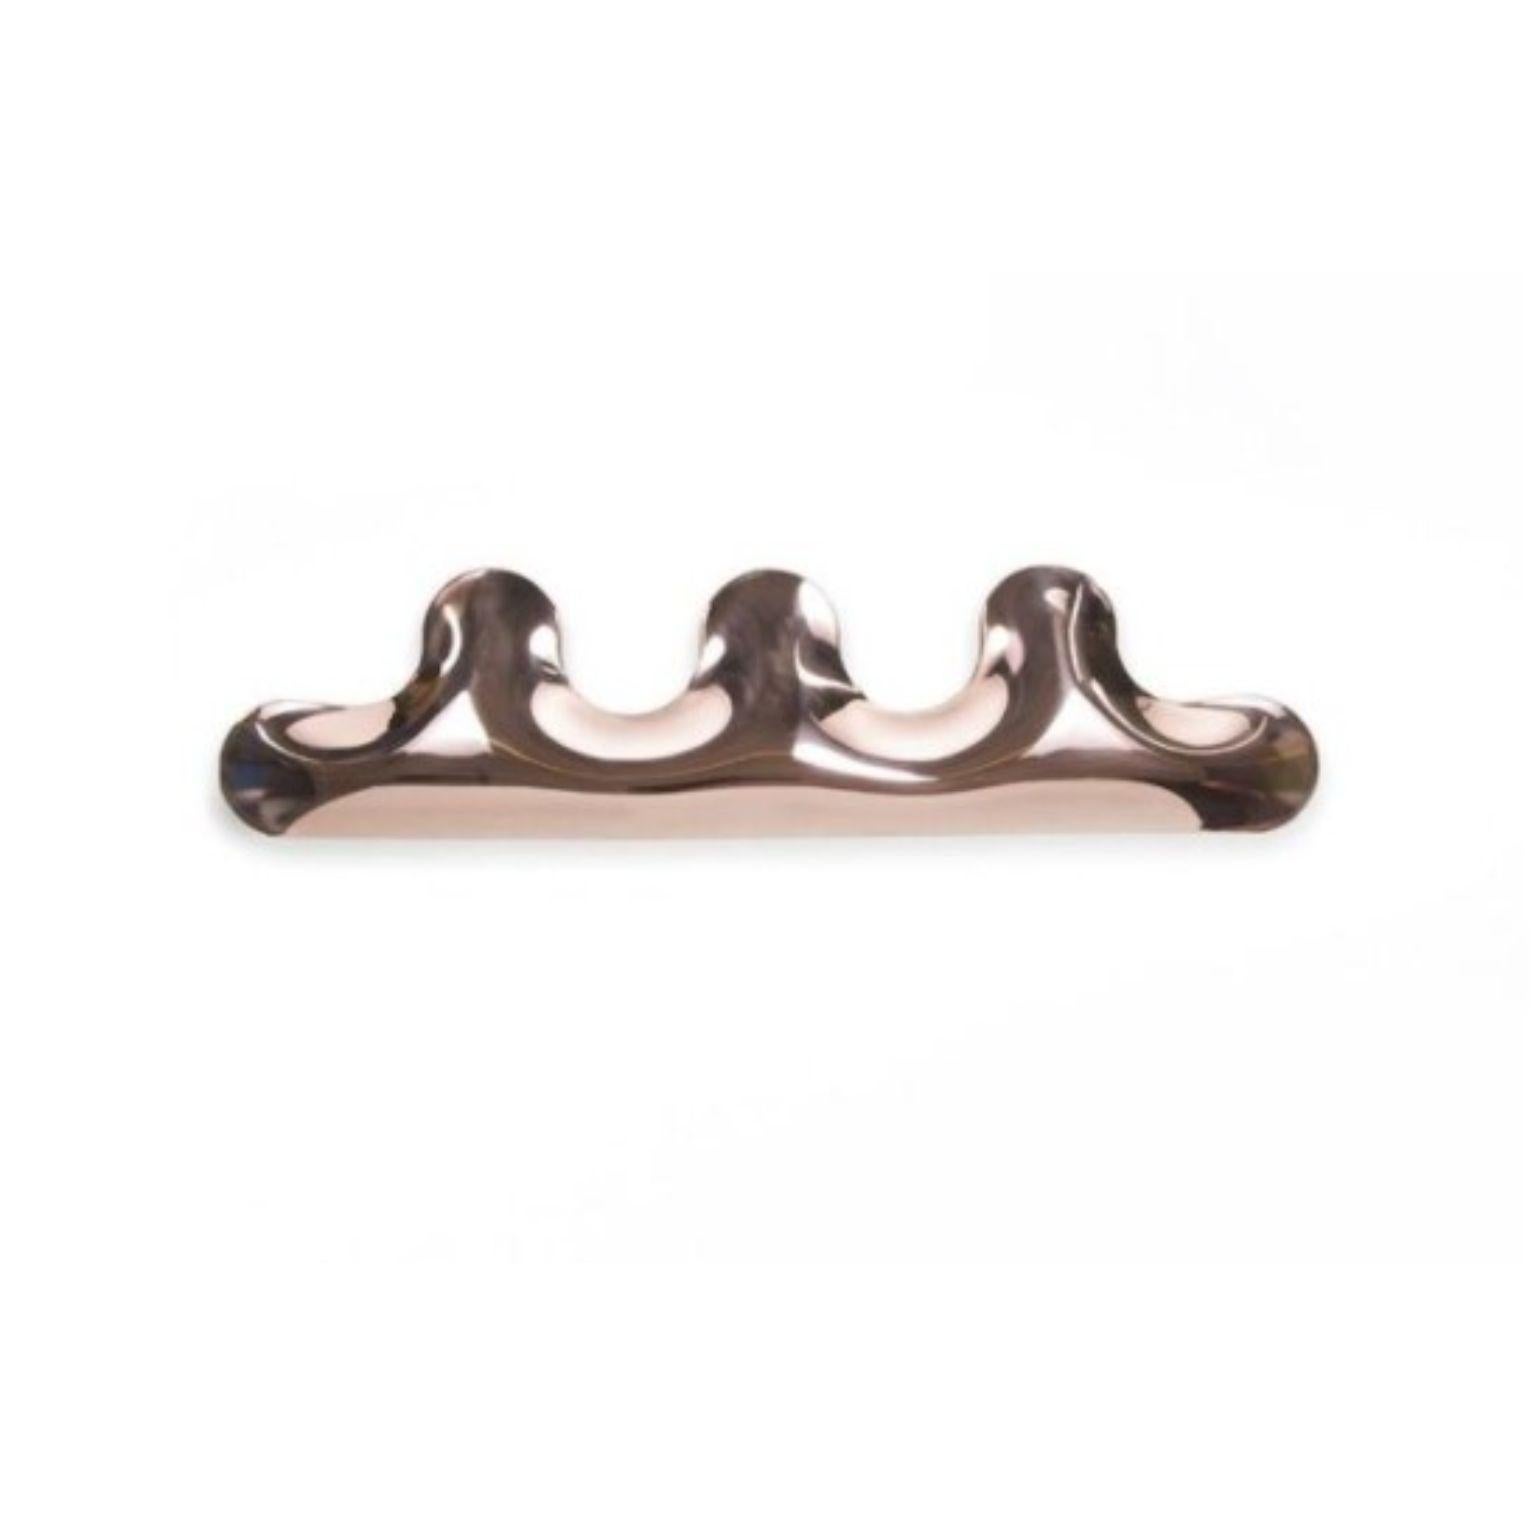 Copper Polished Kamm 3 coat hanger by Zieta
Dimensions: D 6 x W 51 x H 13 cm 
Material: Copper.
Finish: Polished.
Available in colors: Beige Grey, Black Glossy, Graphite, Stainless Steel, White Glossy, Flamed Gold, and Cosmic Blue. Also available in